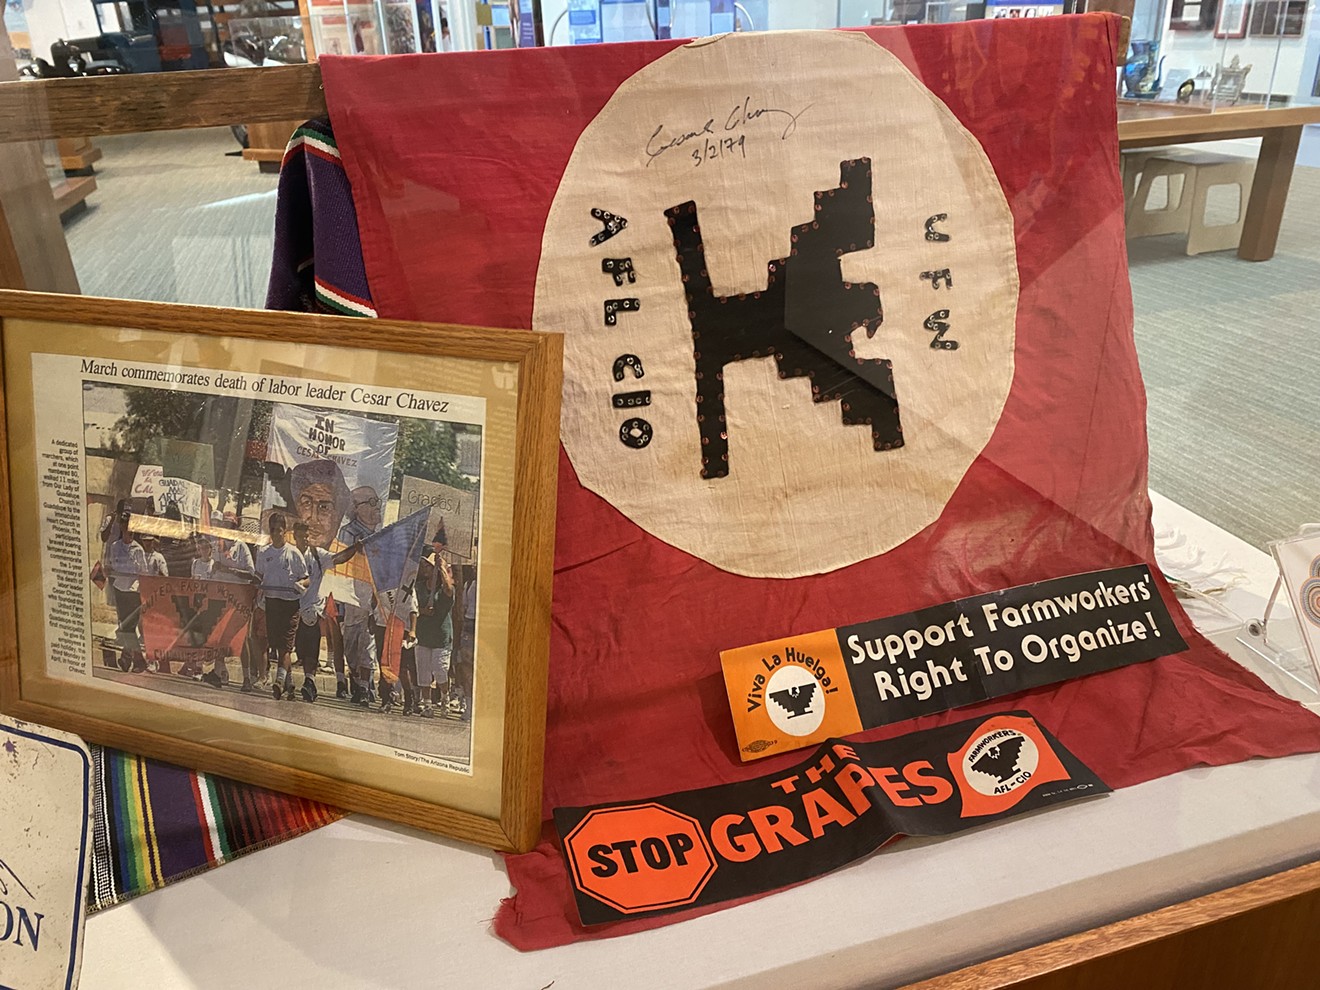 An AFL-CIO flag signed by Cesar Chavez is one of many items loaned to the Tempe History Museum for the exhibit on Guadalupe.